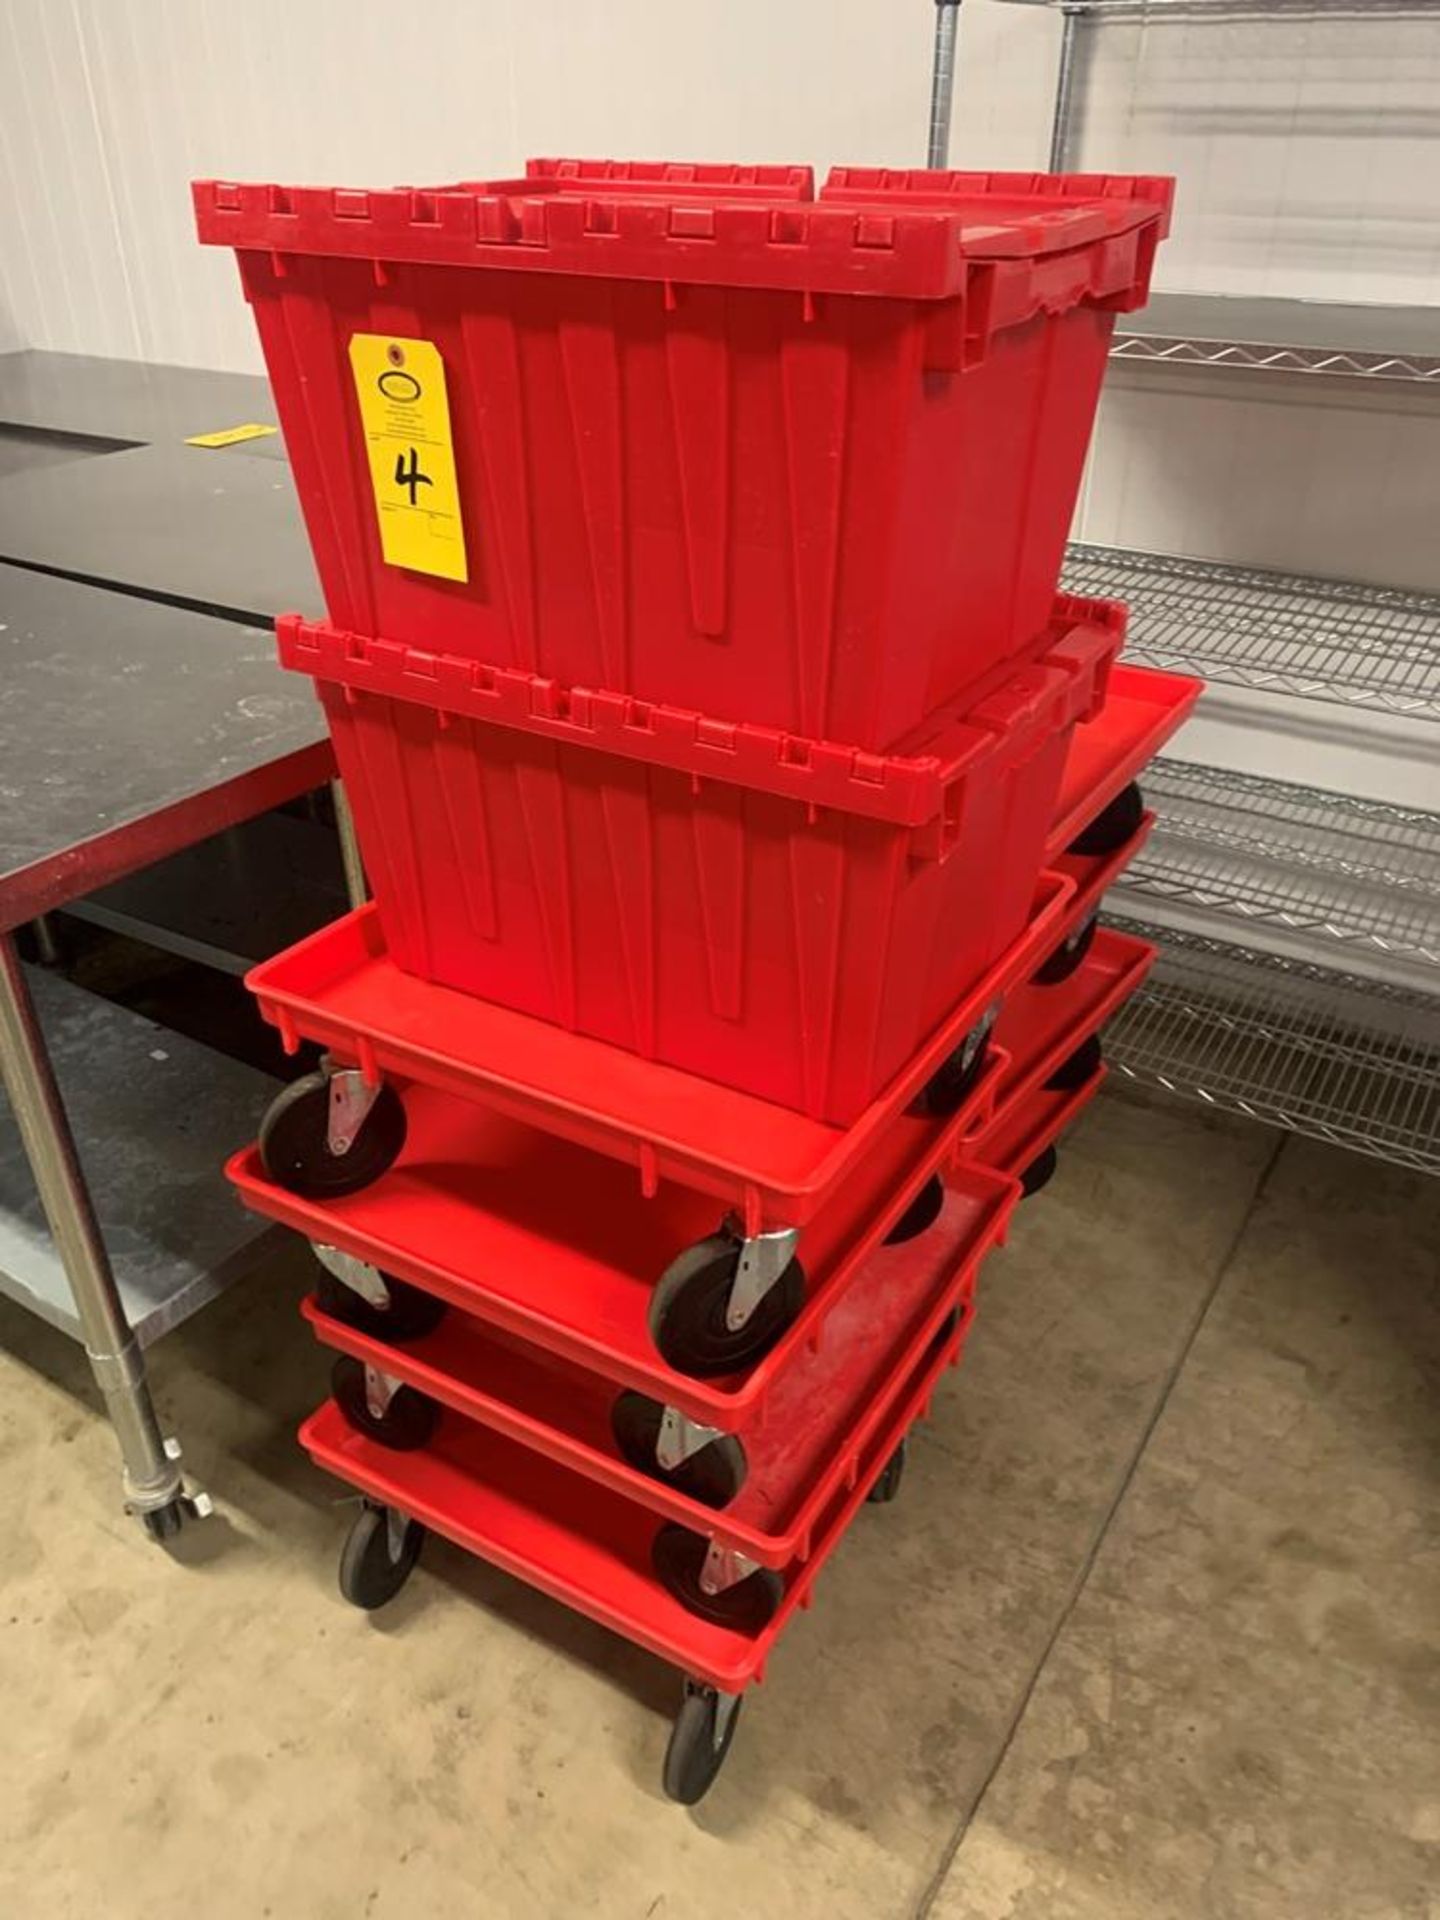 Lot of (4) Red Totes, 20" X 15" X 12" with folding lids, (8) Dollies, 20" X 20" - Image 2 of 2